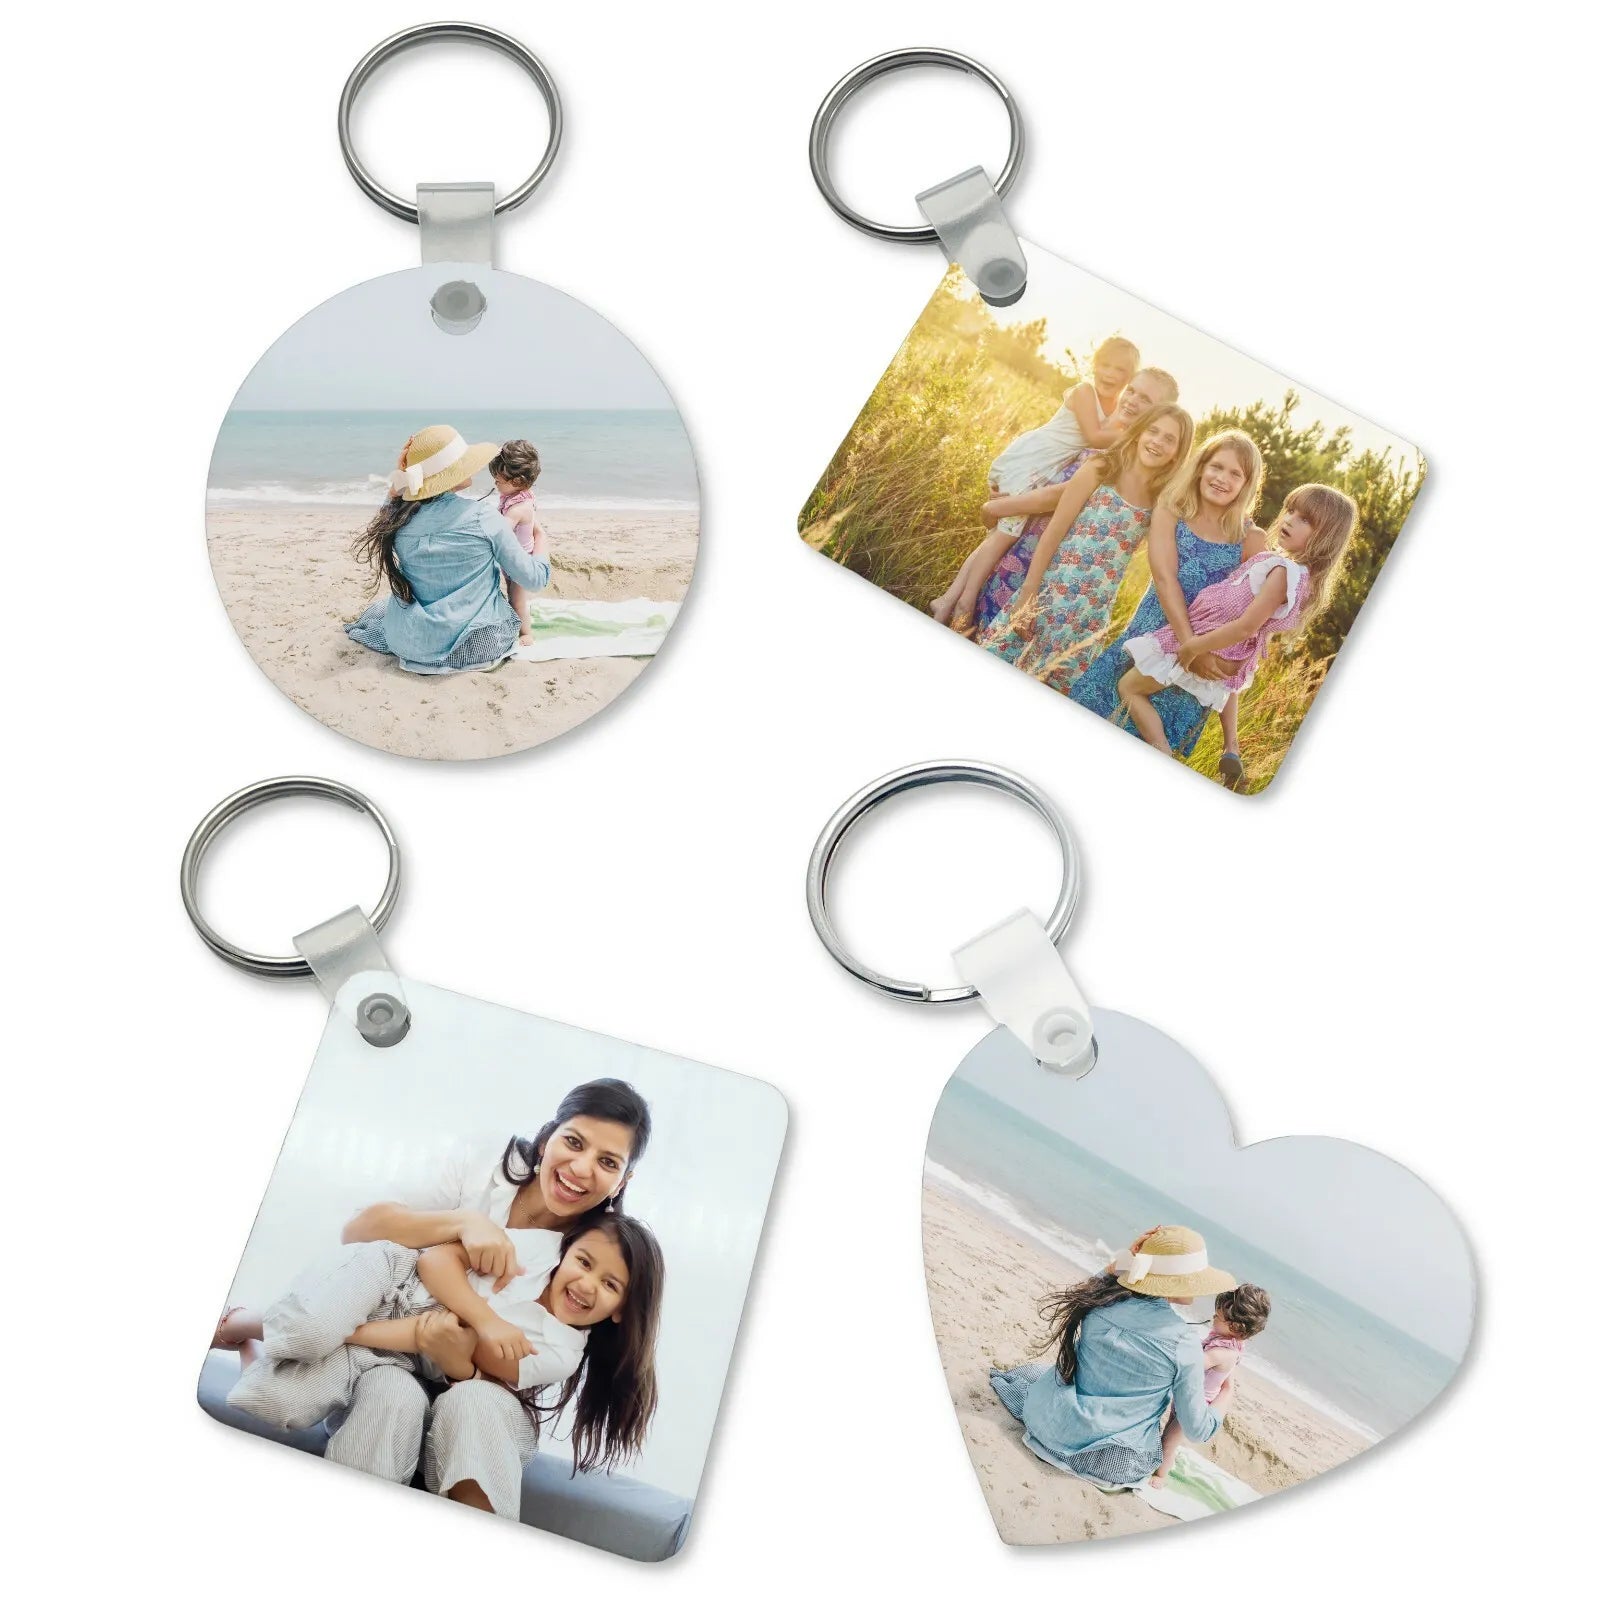 Personalised Keyrings - Logos, Names, Pictures, Letters, Numbers